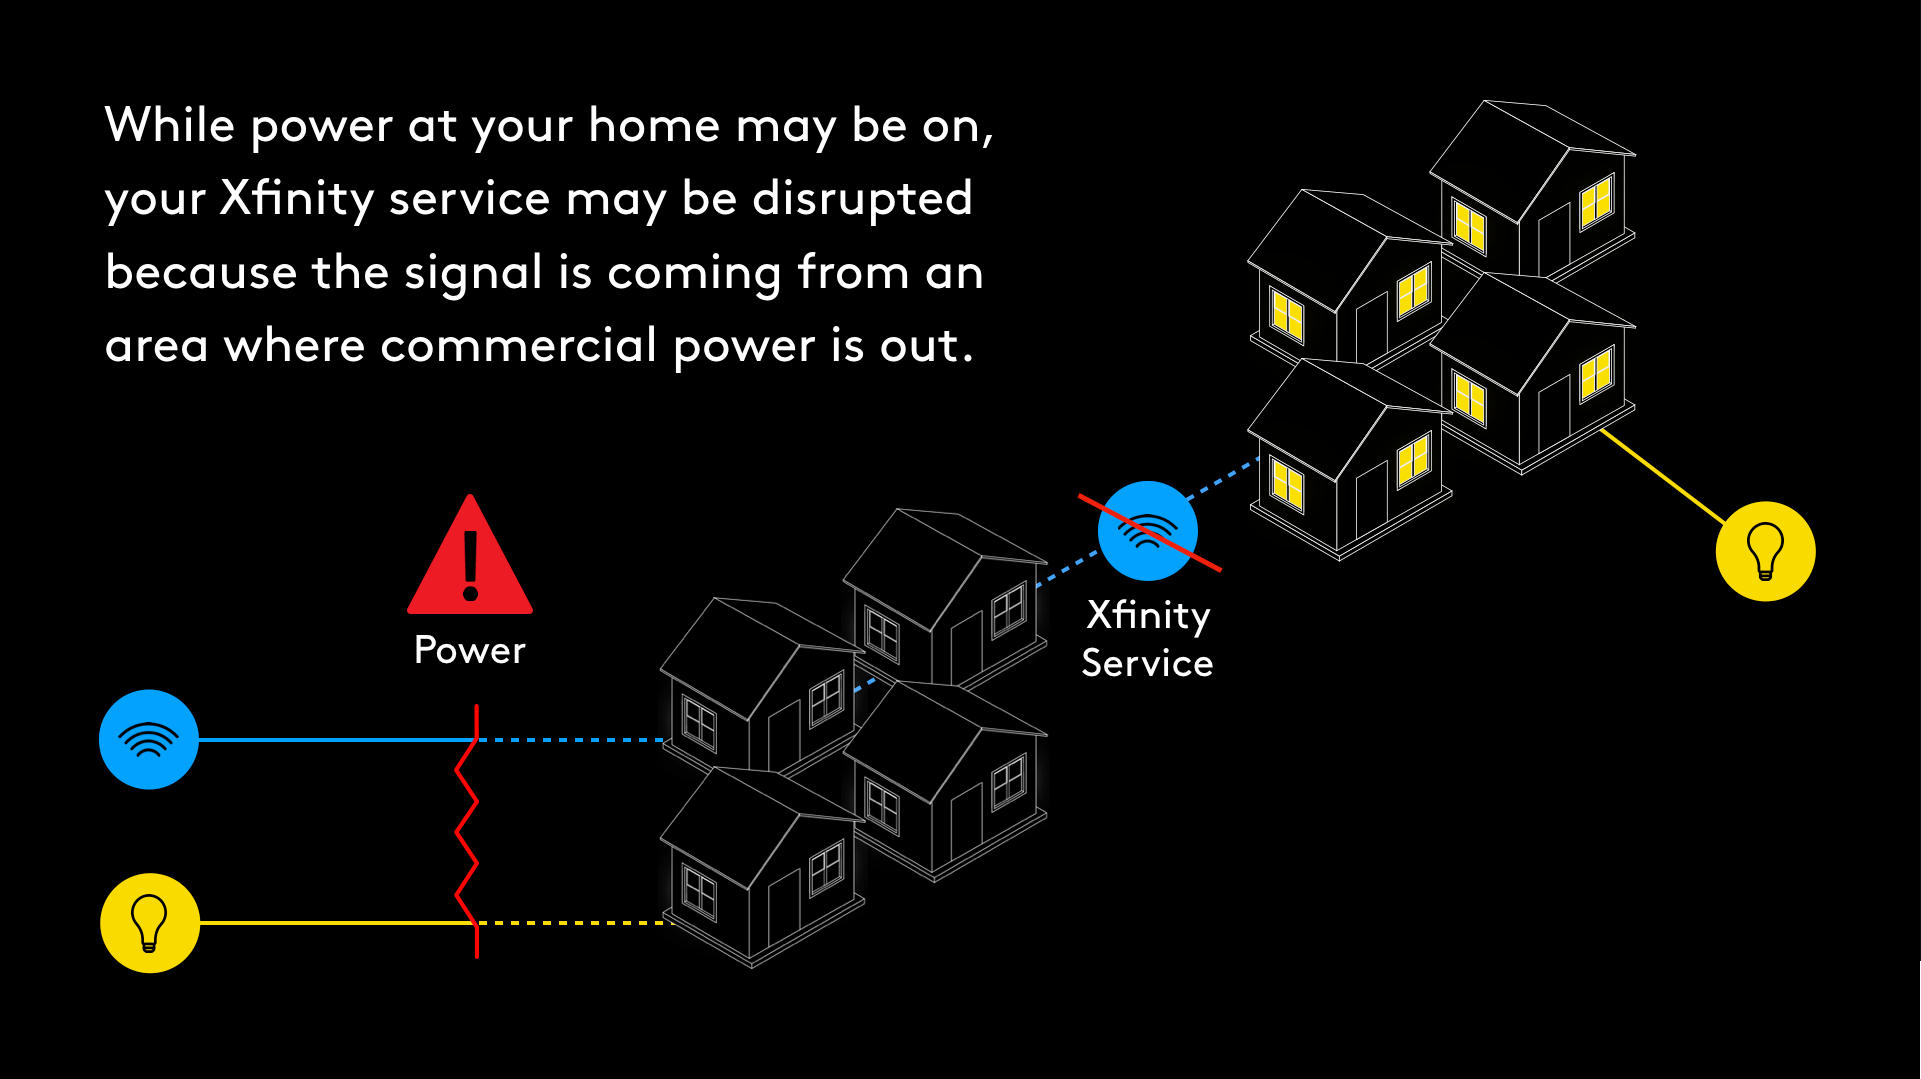 An infographic explaning why internet service may not be working even though power is on